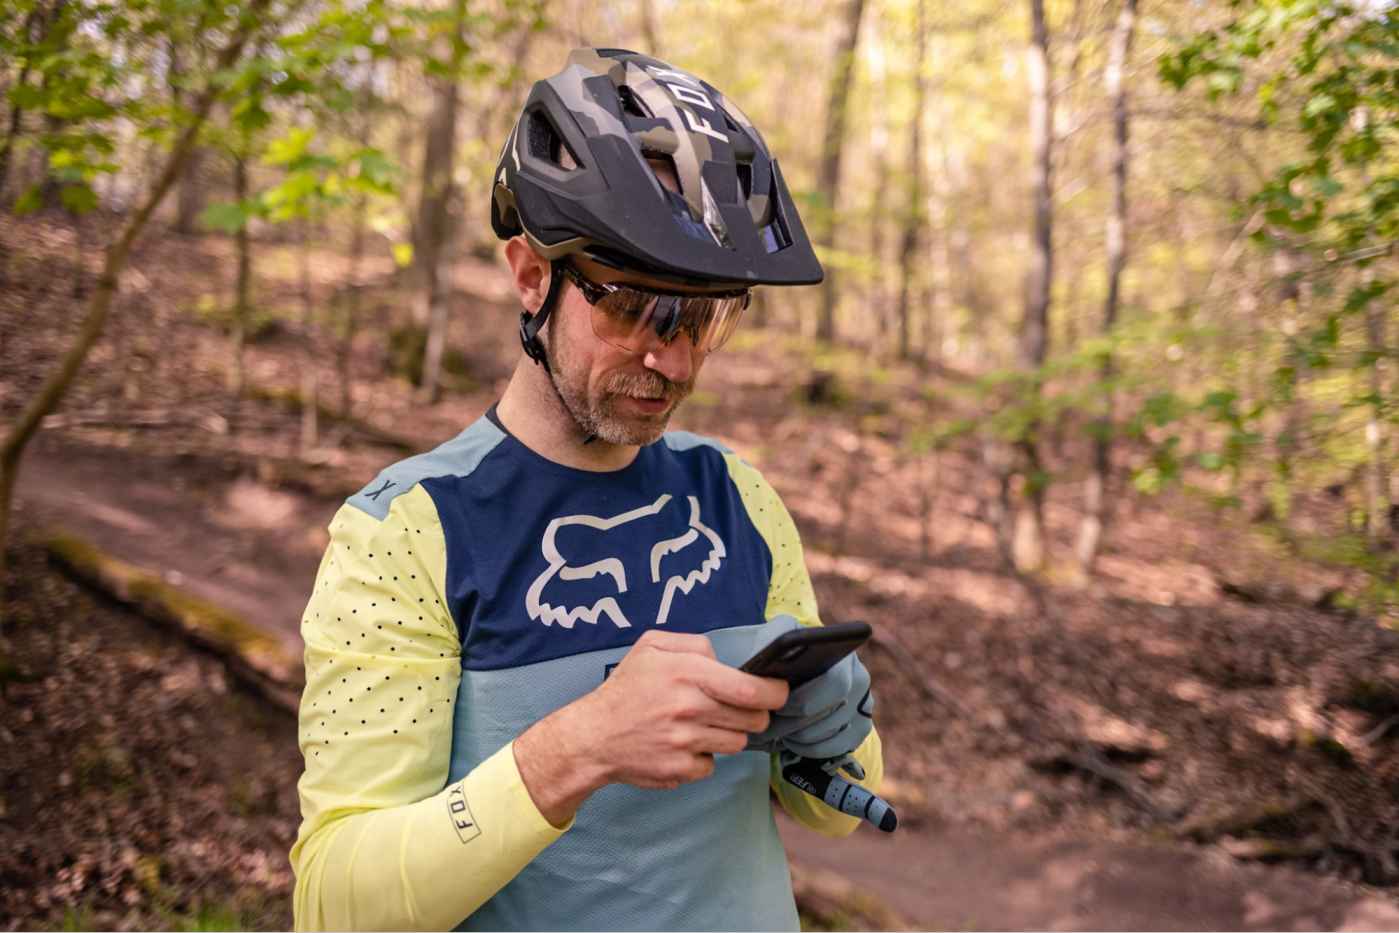 A male mountain biker checking his phone trailside in the forest on a sunny spring day.